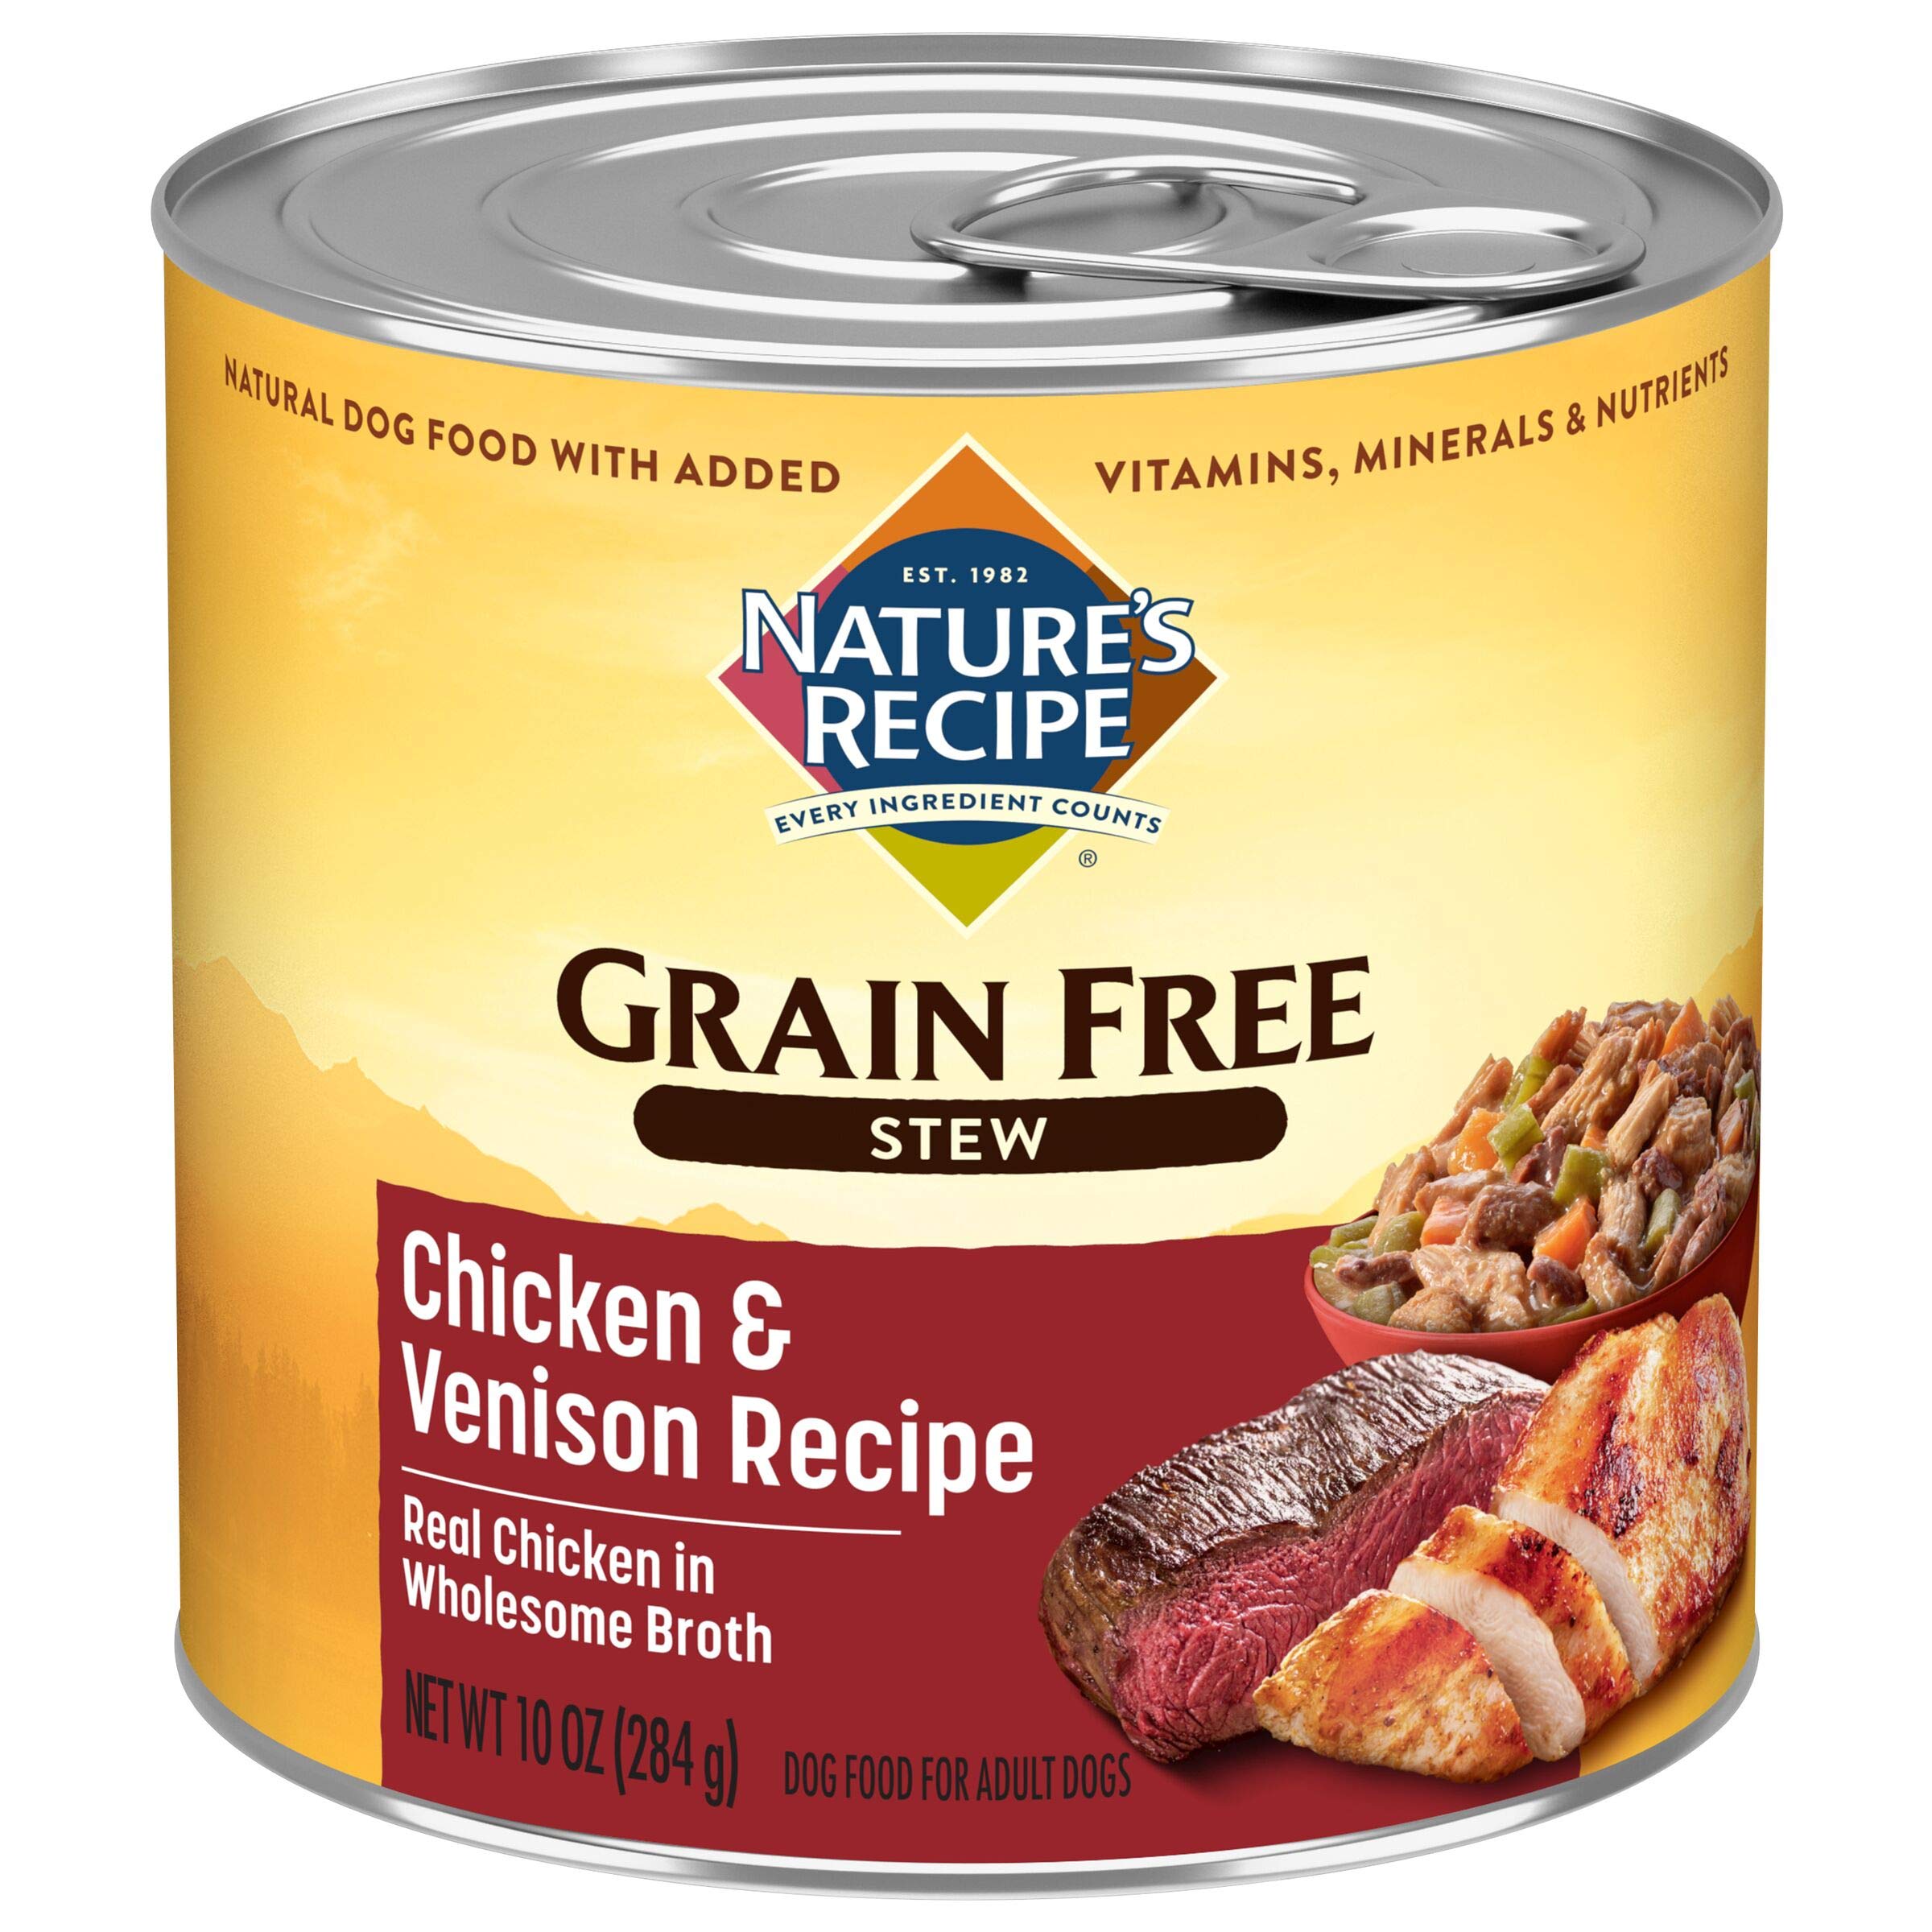 Nature's Recipe Grain Free Wet Dog Food, Chicken & Venison Stew Recipe, 10 Ounce Can (Pack of 12)